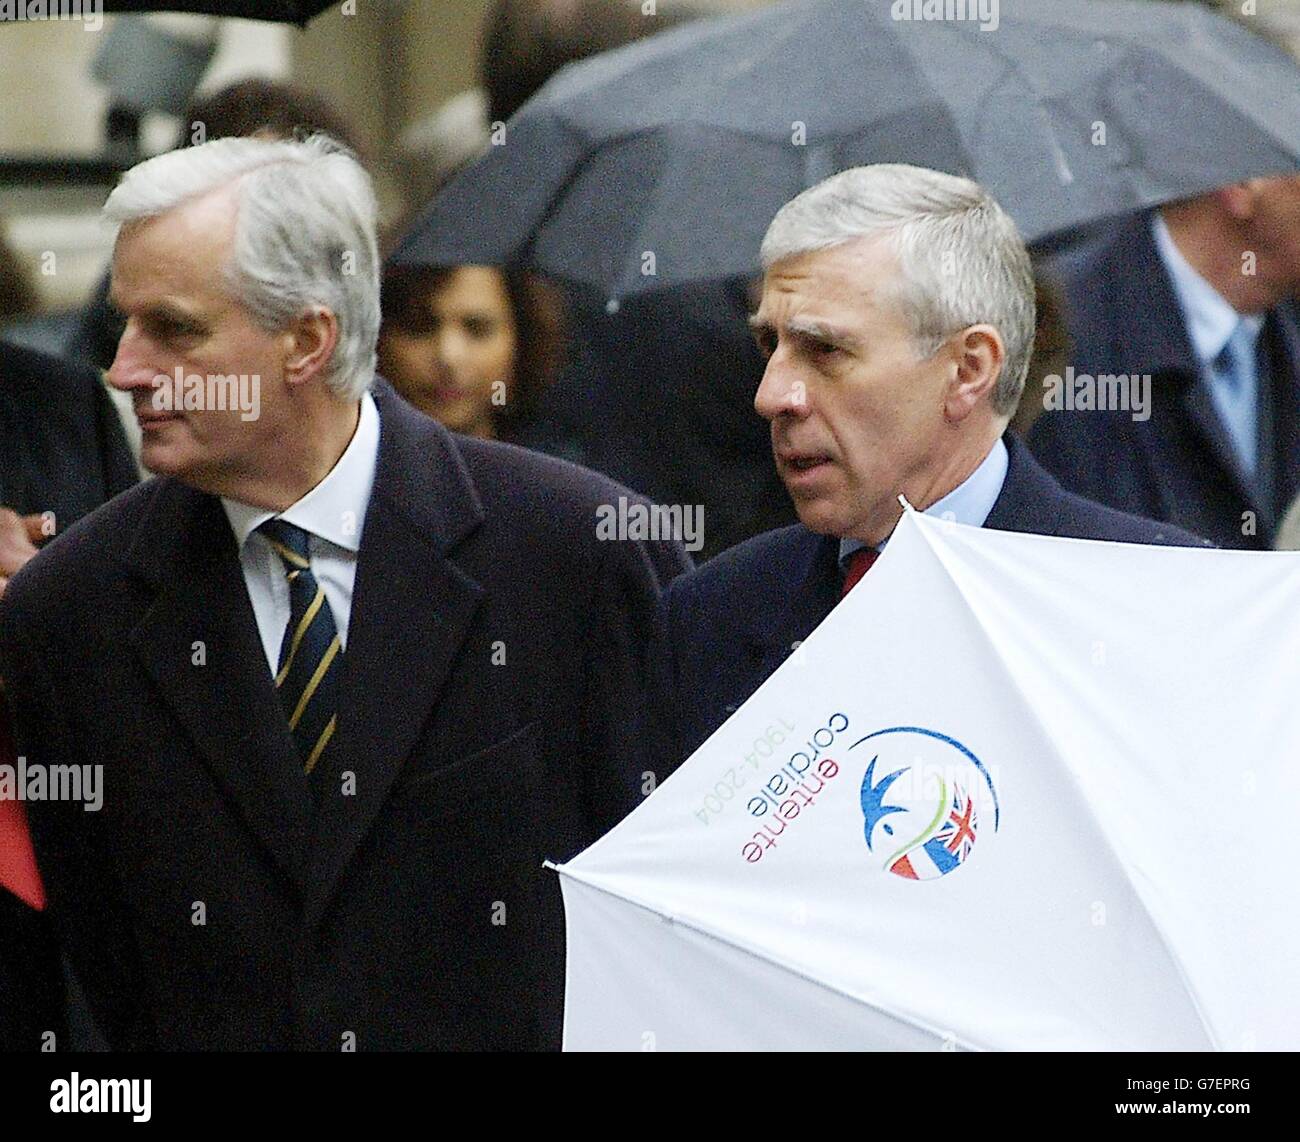 British Foreign Secretary Jack Straw (right) folds his Entente Cordiale umbrella as he walks with his French counterpart Michel Barnier in the courtyard of the Foreign and Commonwealth Office, central London. President Chirac is to hold talks at No 10 Downing Street with Britain's Prime Minister Tony Blair. Stock Photo